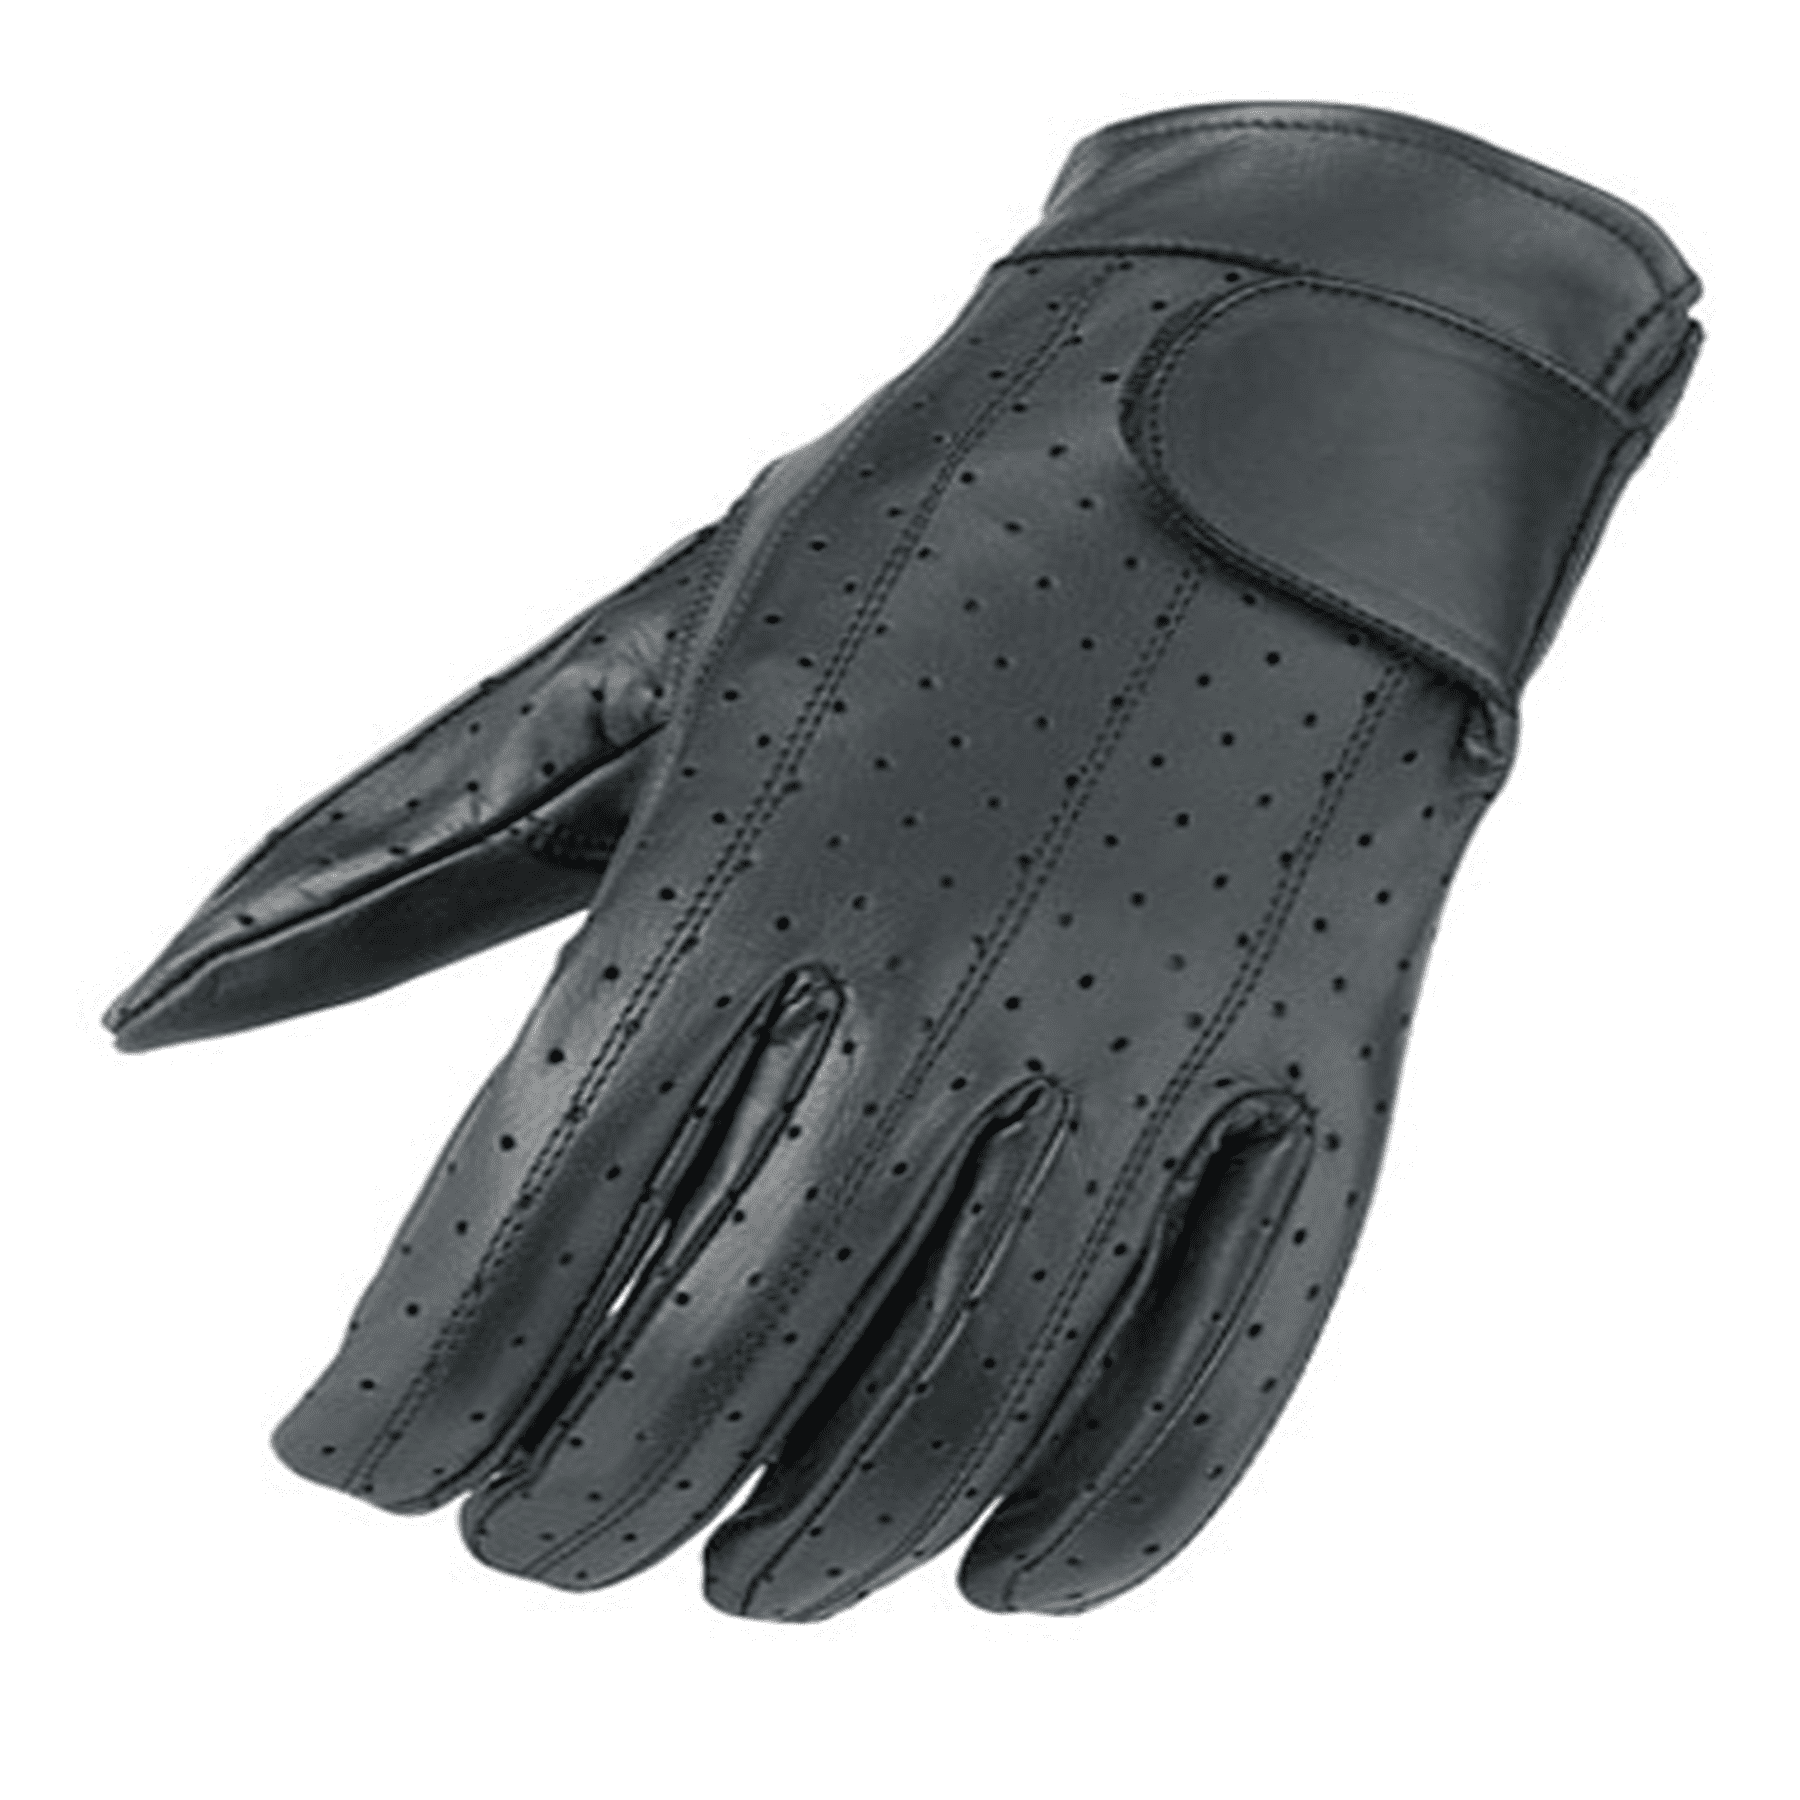 Leather Non-Lined Wrist Strap Soft Perforated Riparo Motorsports Driving Gloves 